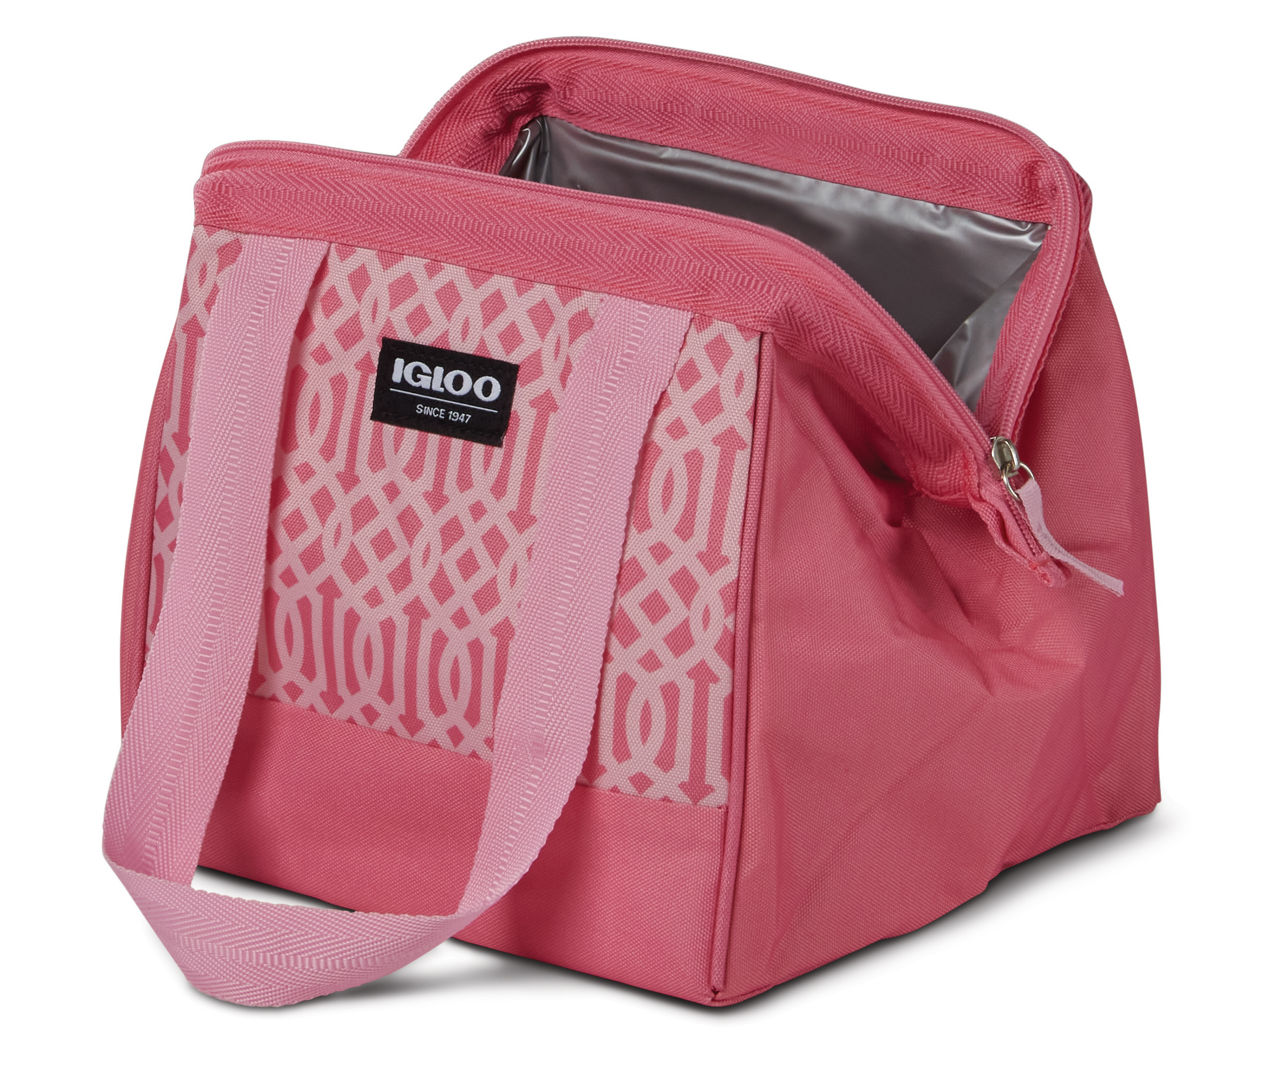 Igloo Leftover Pink Lattice 9-Can Cooler Tote Bag